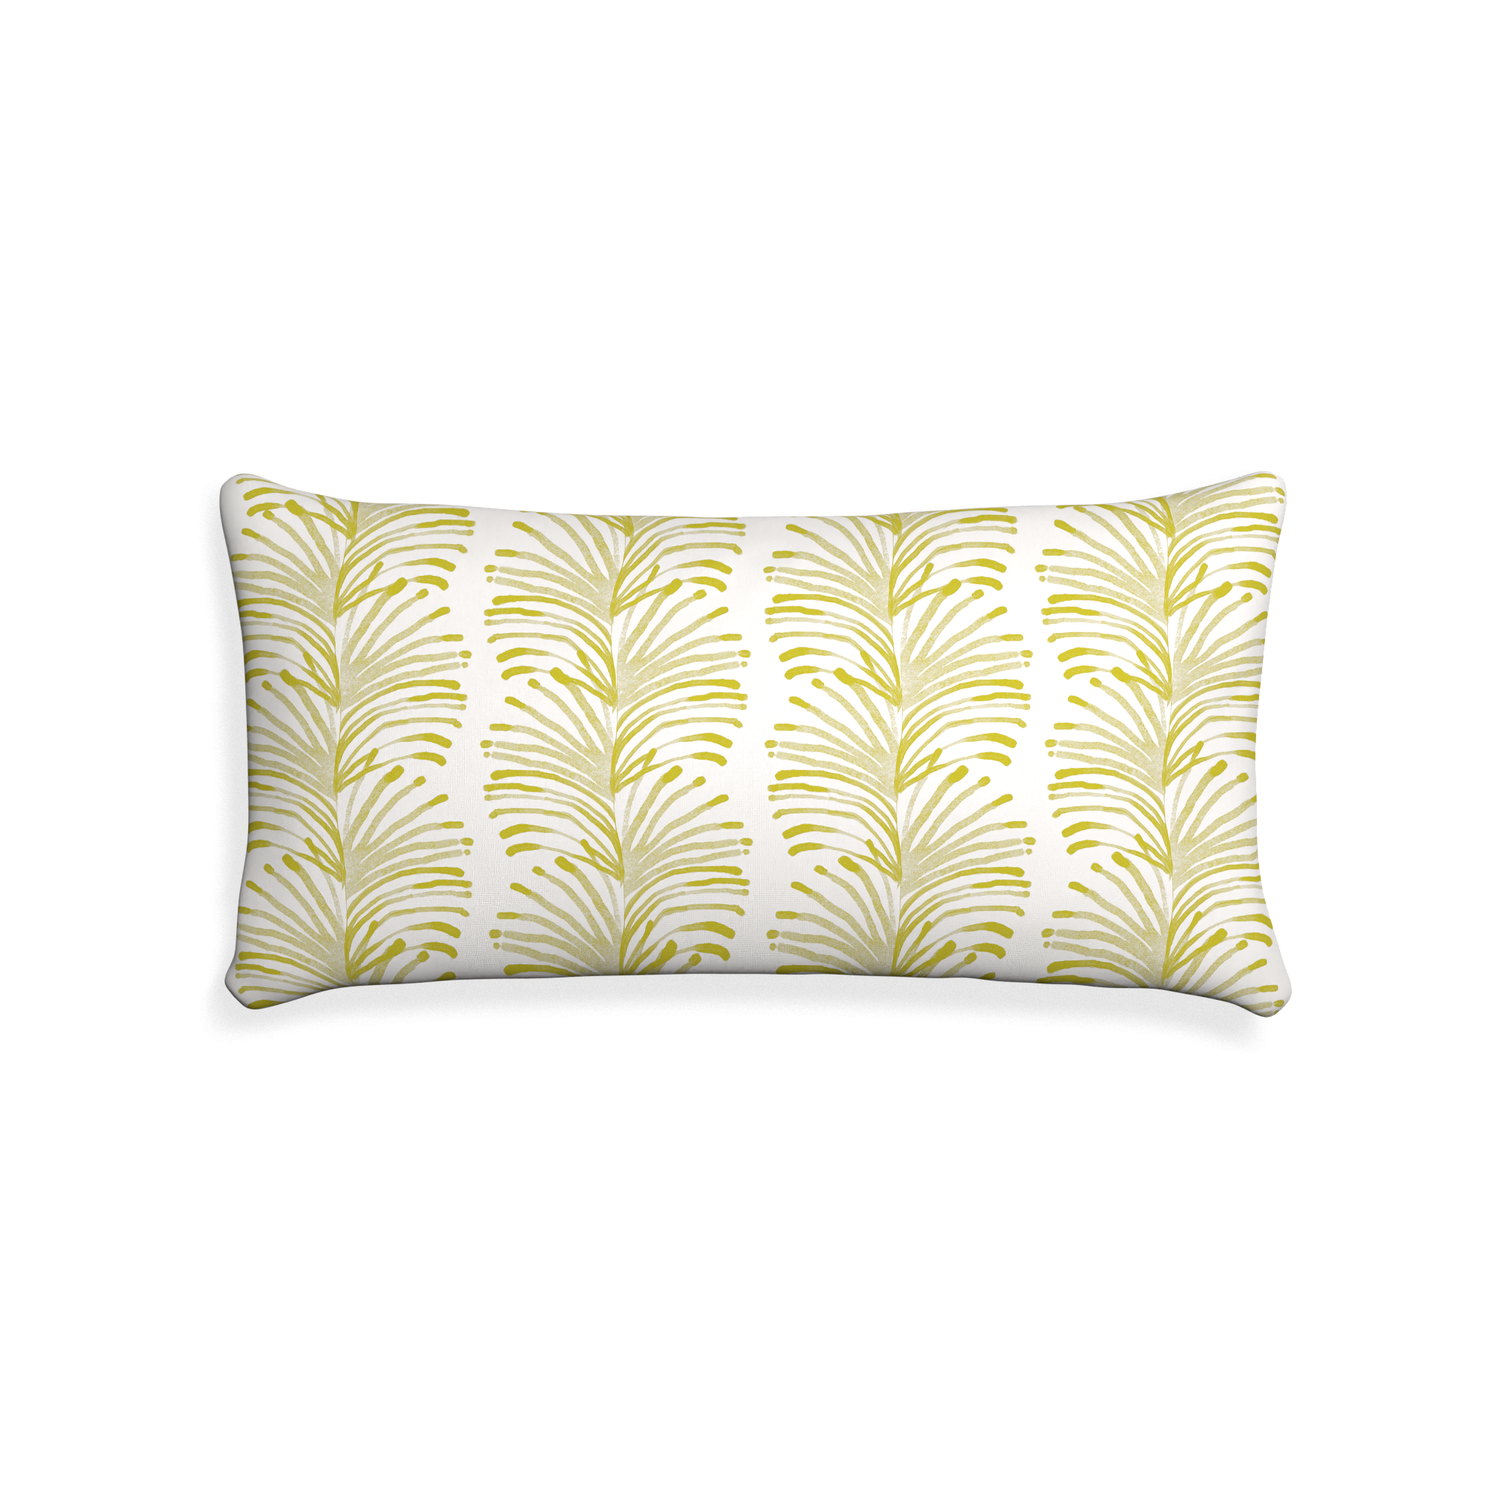 Midi-lumbar emma chartreuse custom yellow stripe chartreusepillow with none on white background